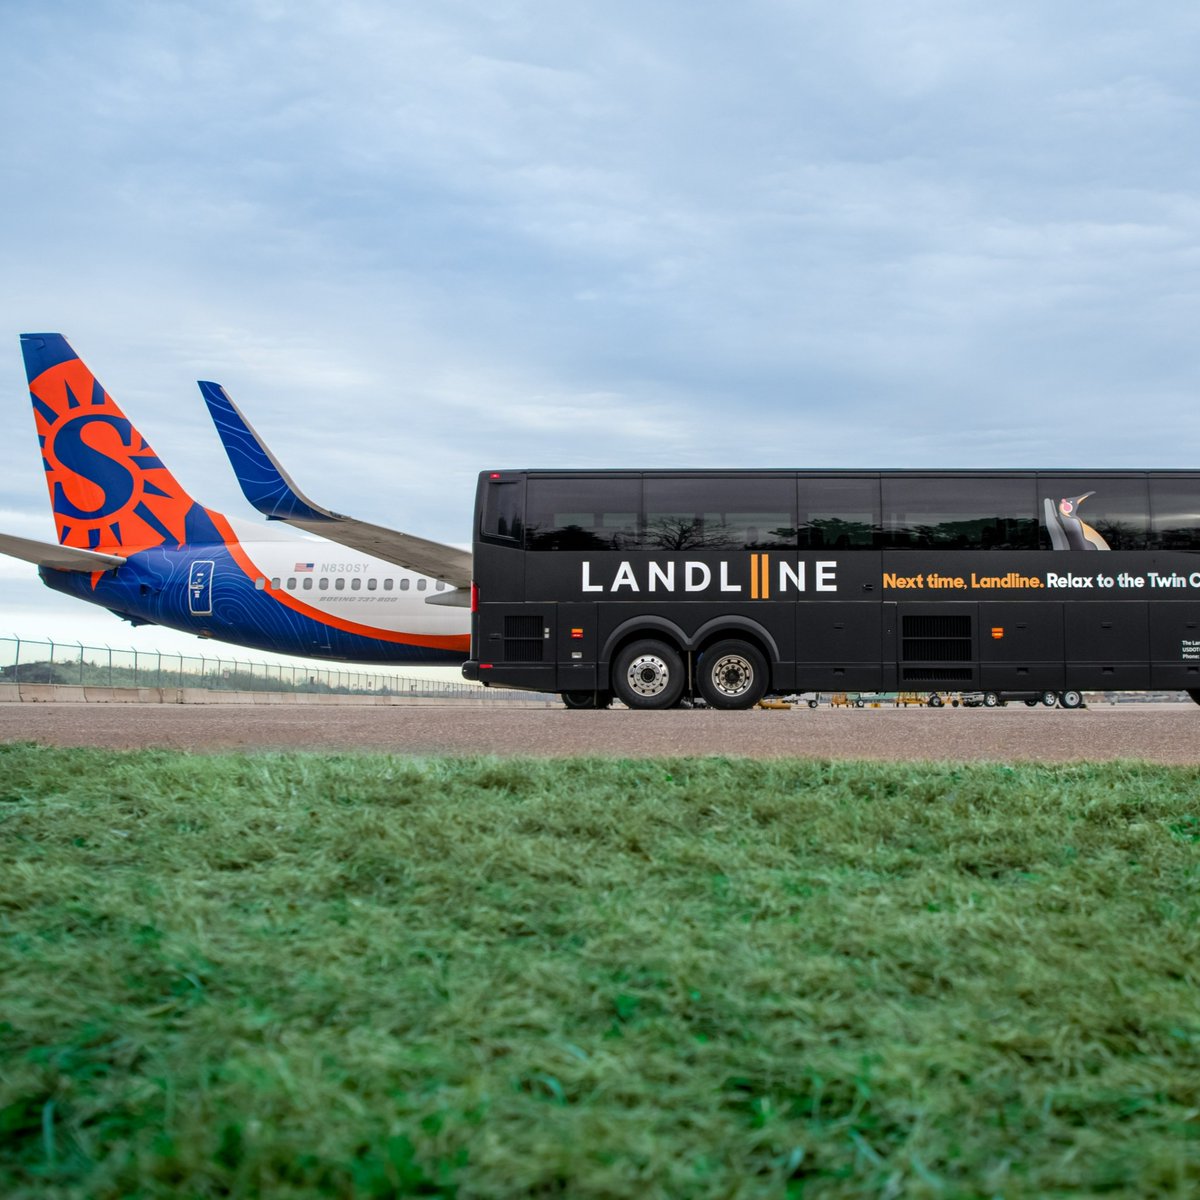 @SunCountryAir service between Fargo and Minneapolis is now FREE until September when you book a flight directly from #SunCountry! That's right, you heard it correctly. @ridelandline suncountry.com